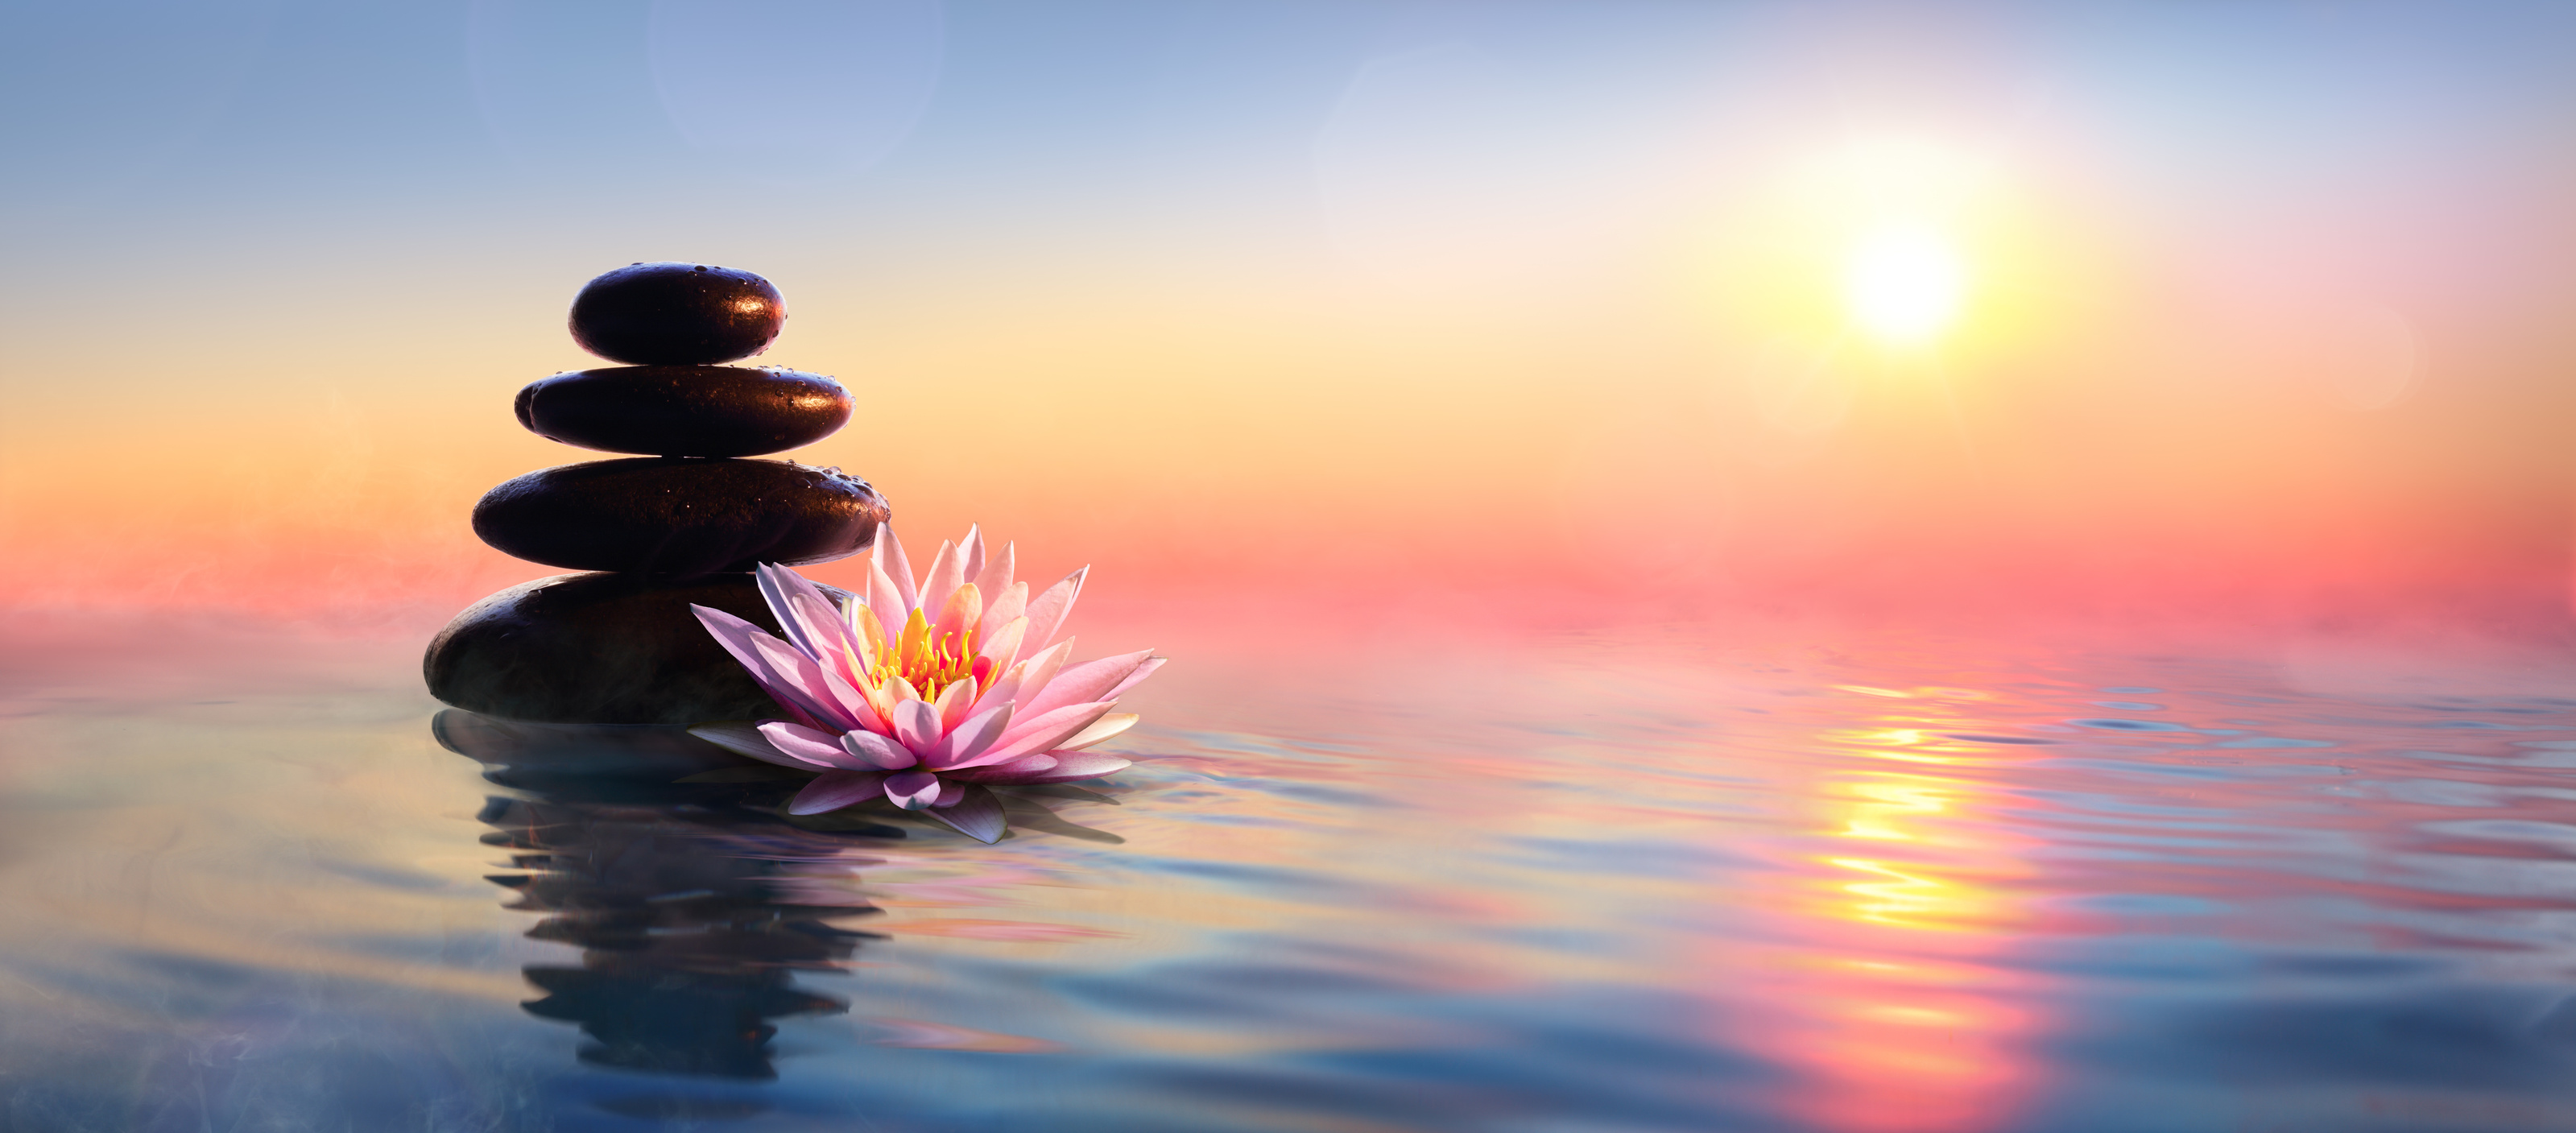 Zen Concept - Spa Stones And Waterlily On Water At Sunset